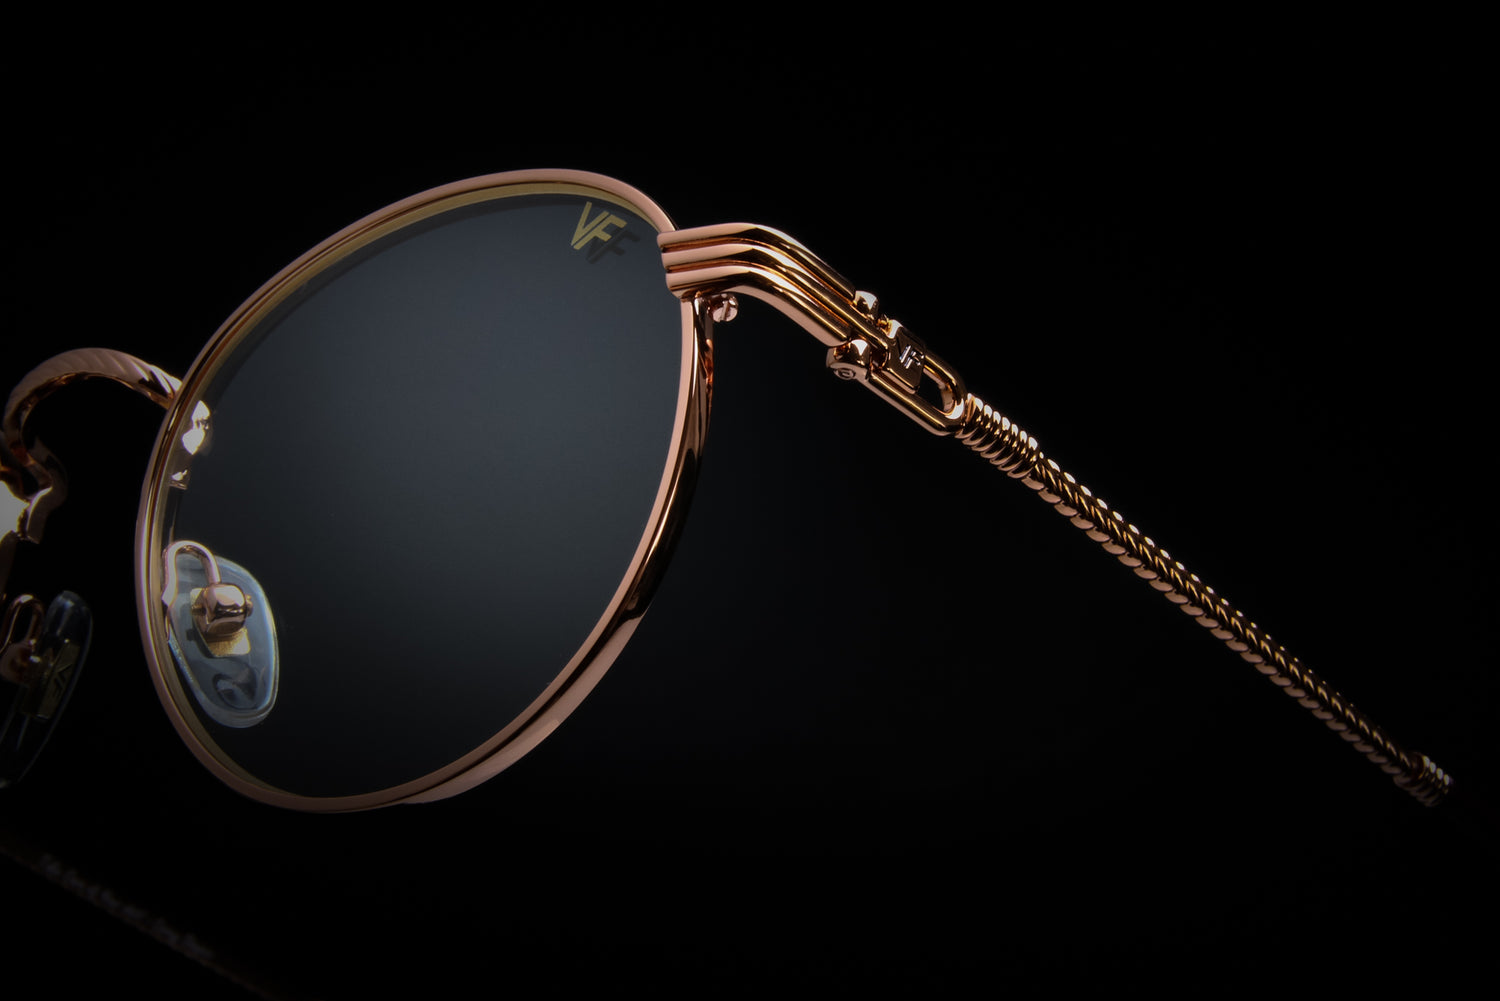 VF Miami Vice 18KT Rose Gold Signature Series Has Arrived!